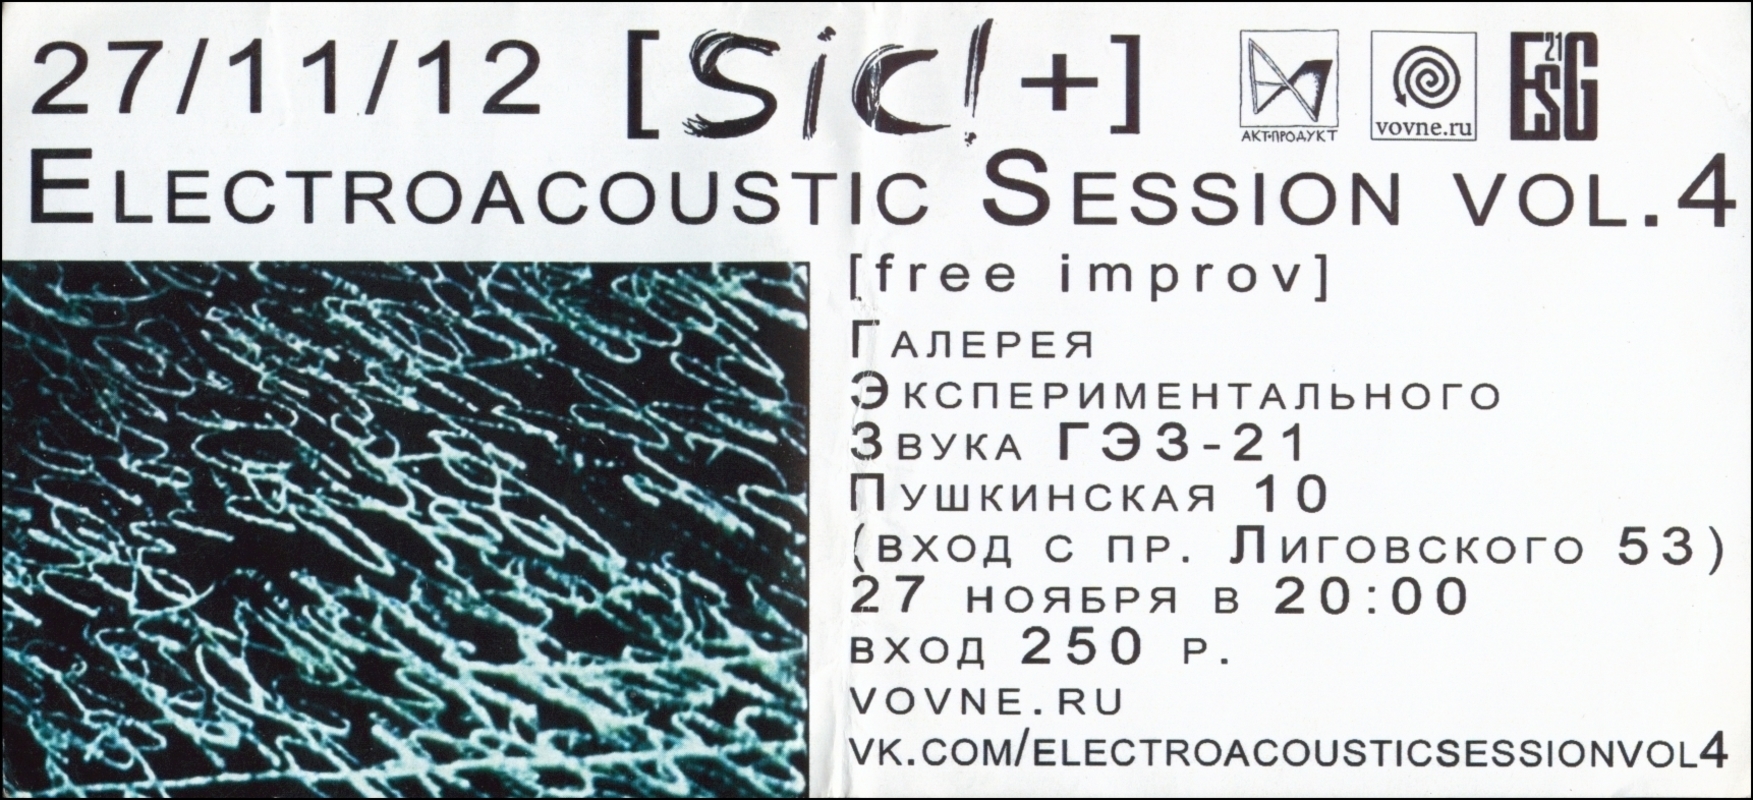 Electroacoustic Session Vol.4